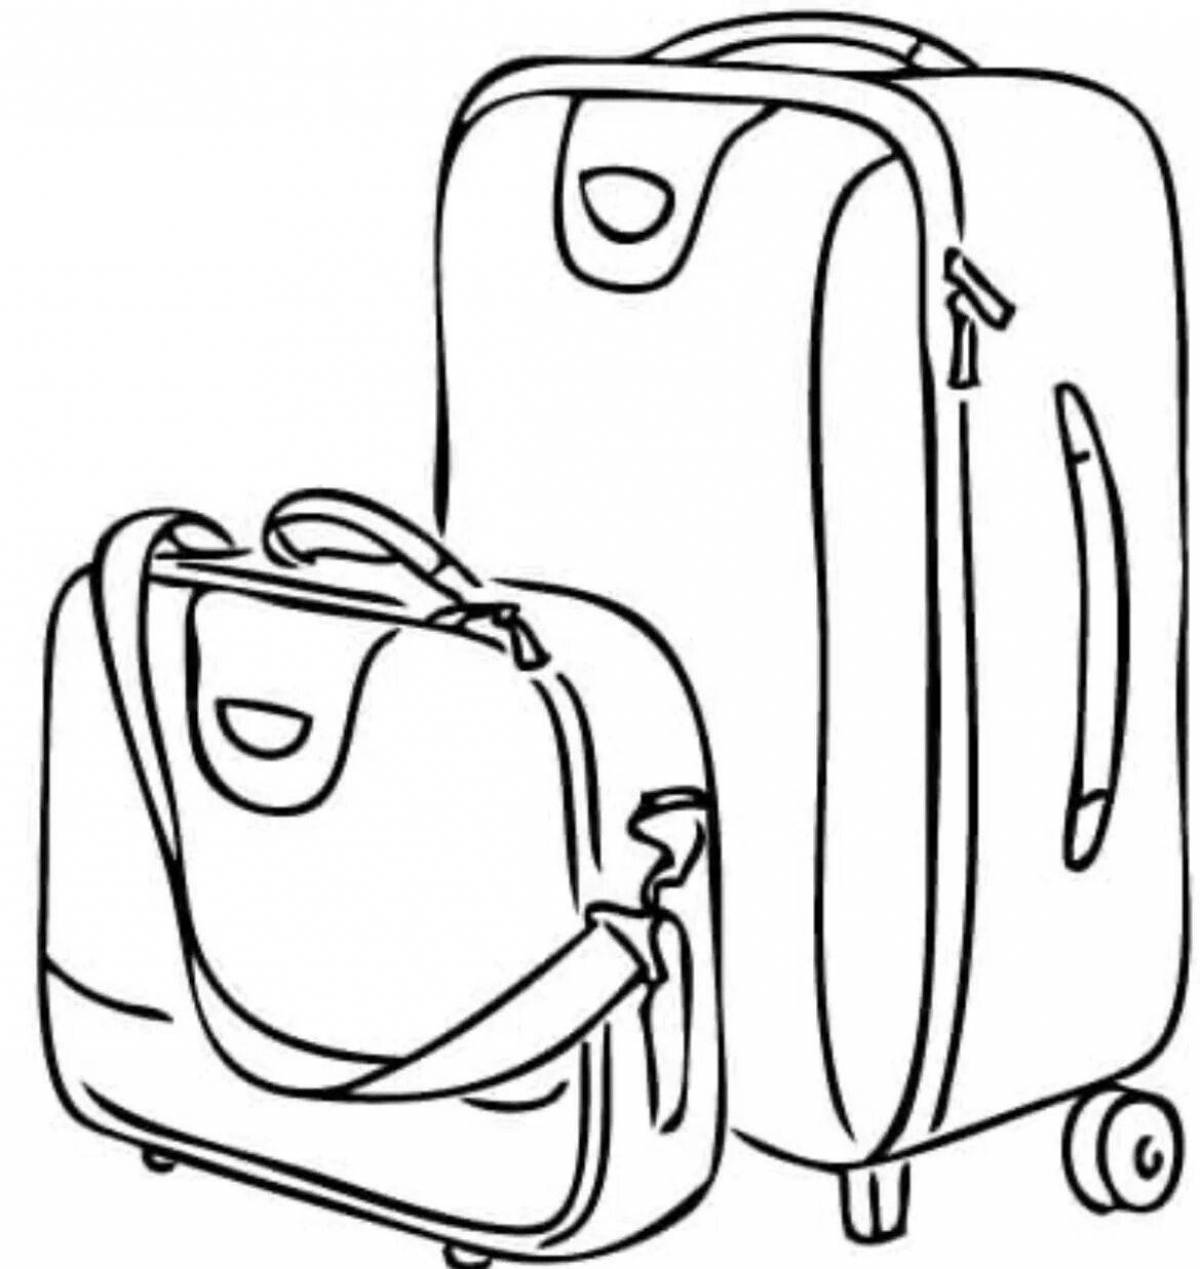 Live suitcase coloring page for kids